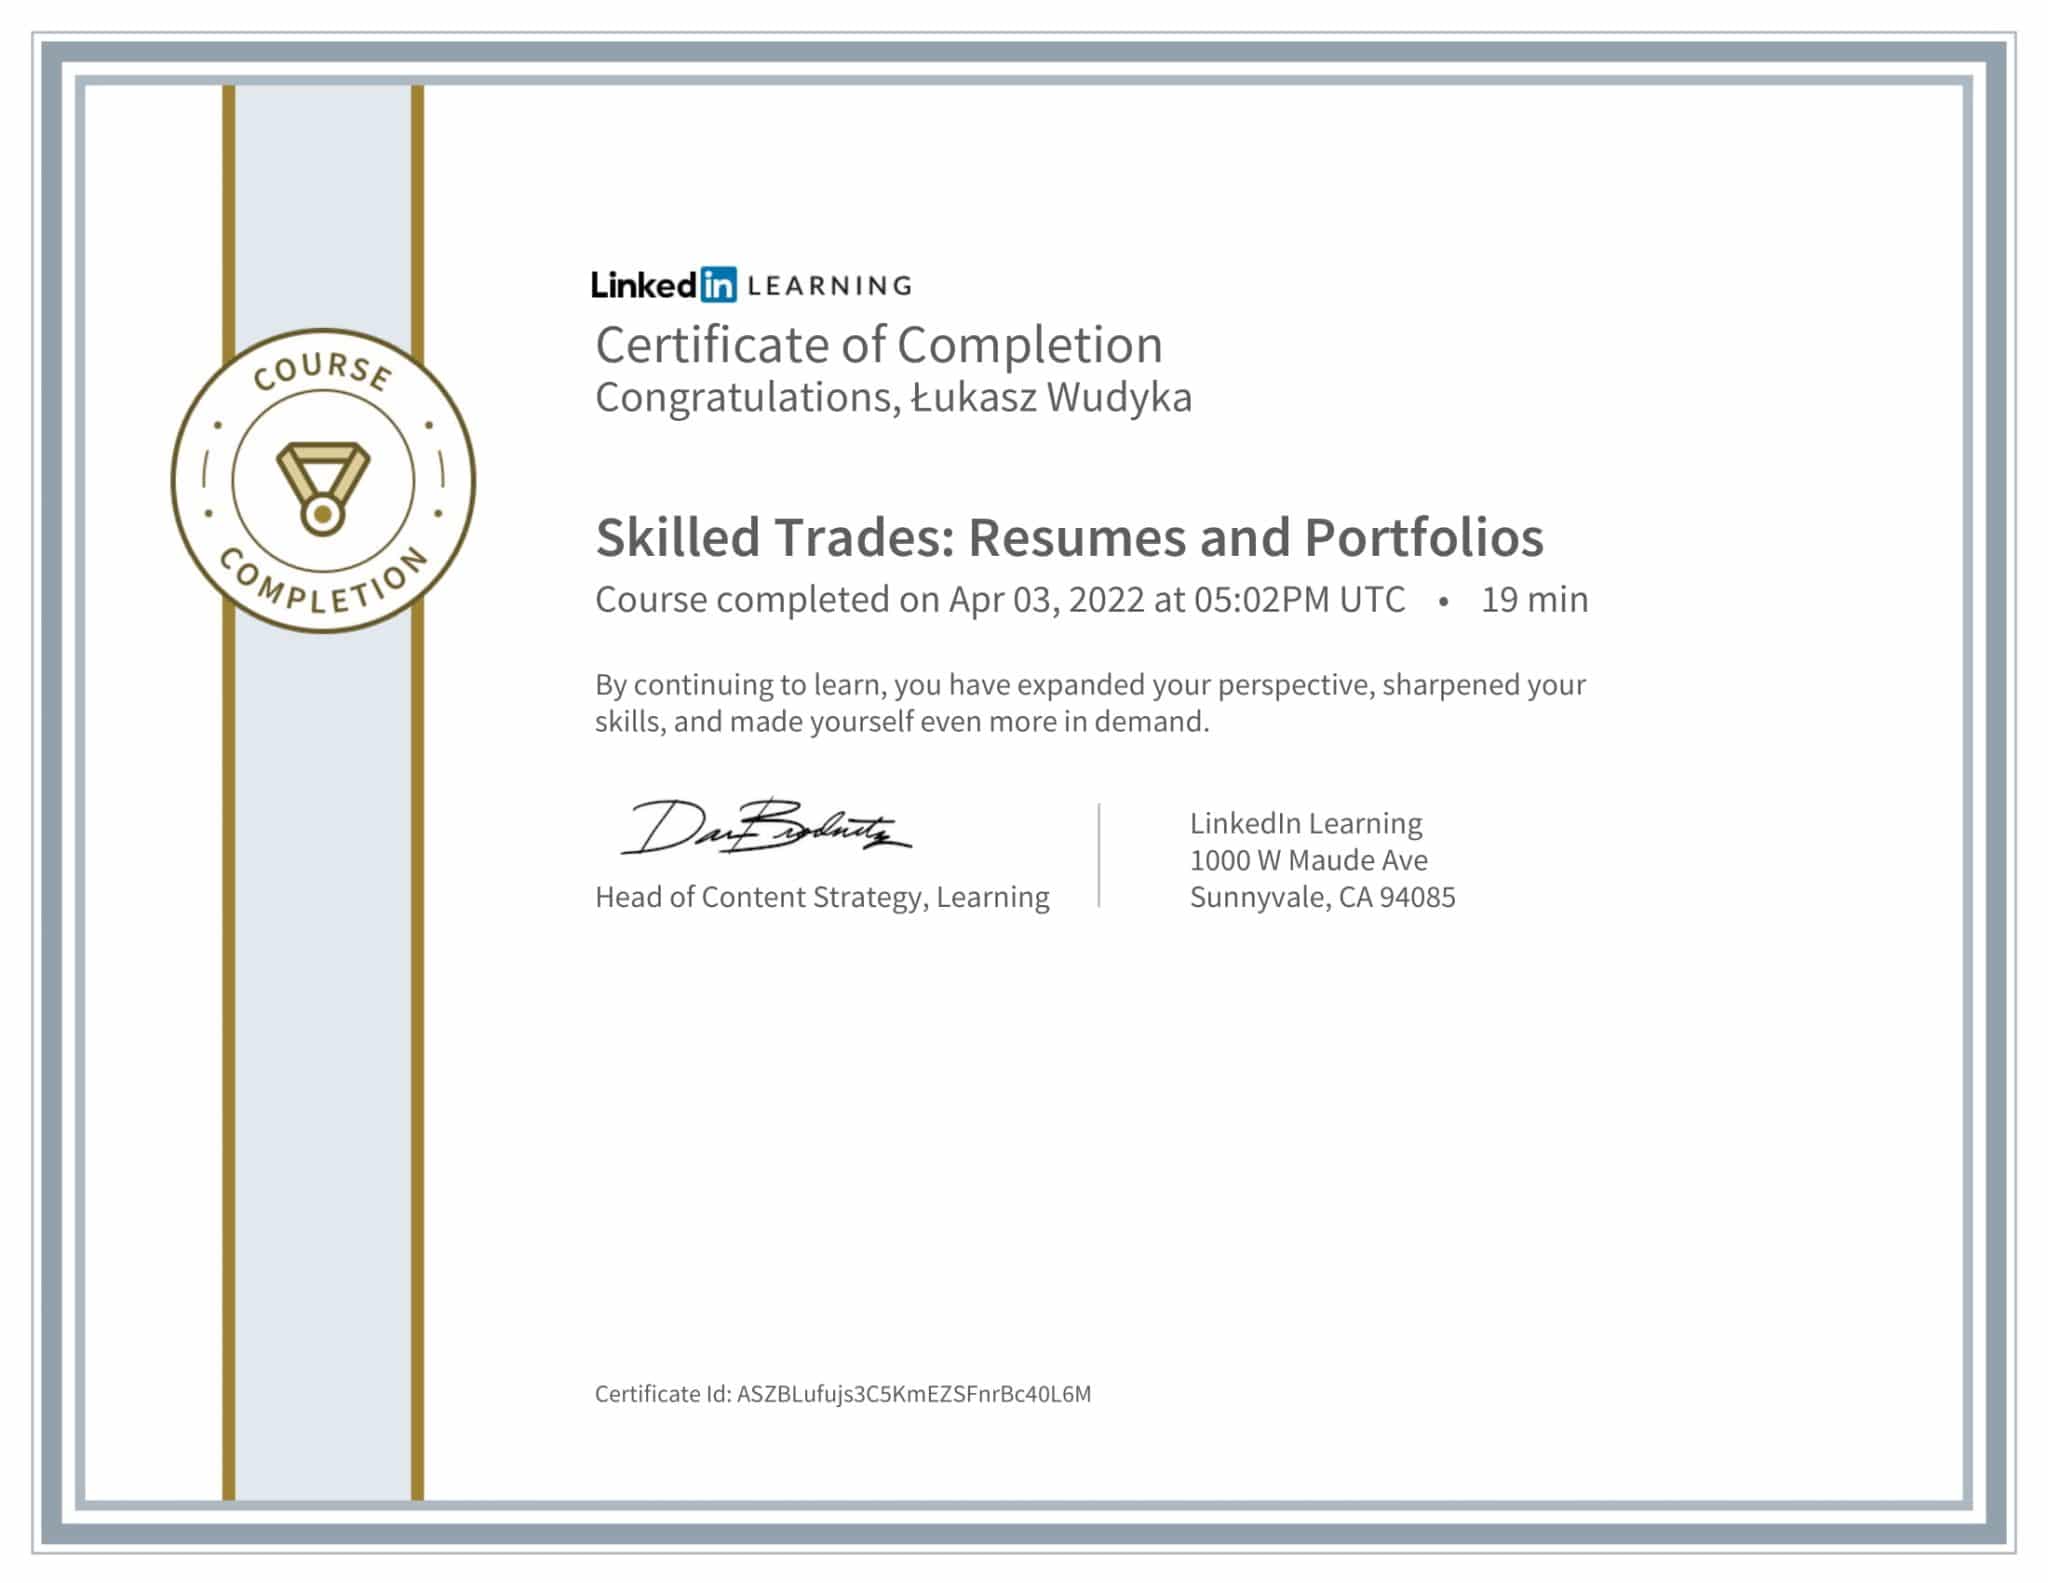 CertificateOfCompletion_Skilled Trades Resumes and Portfolios-1